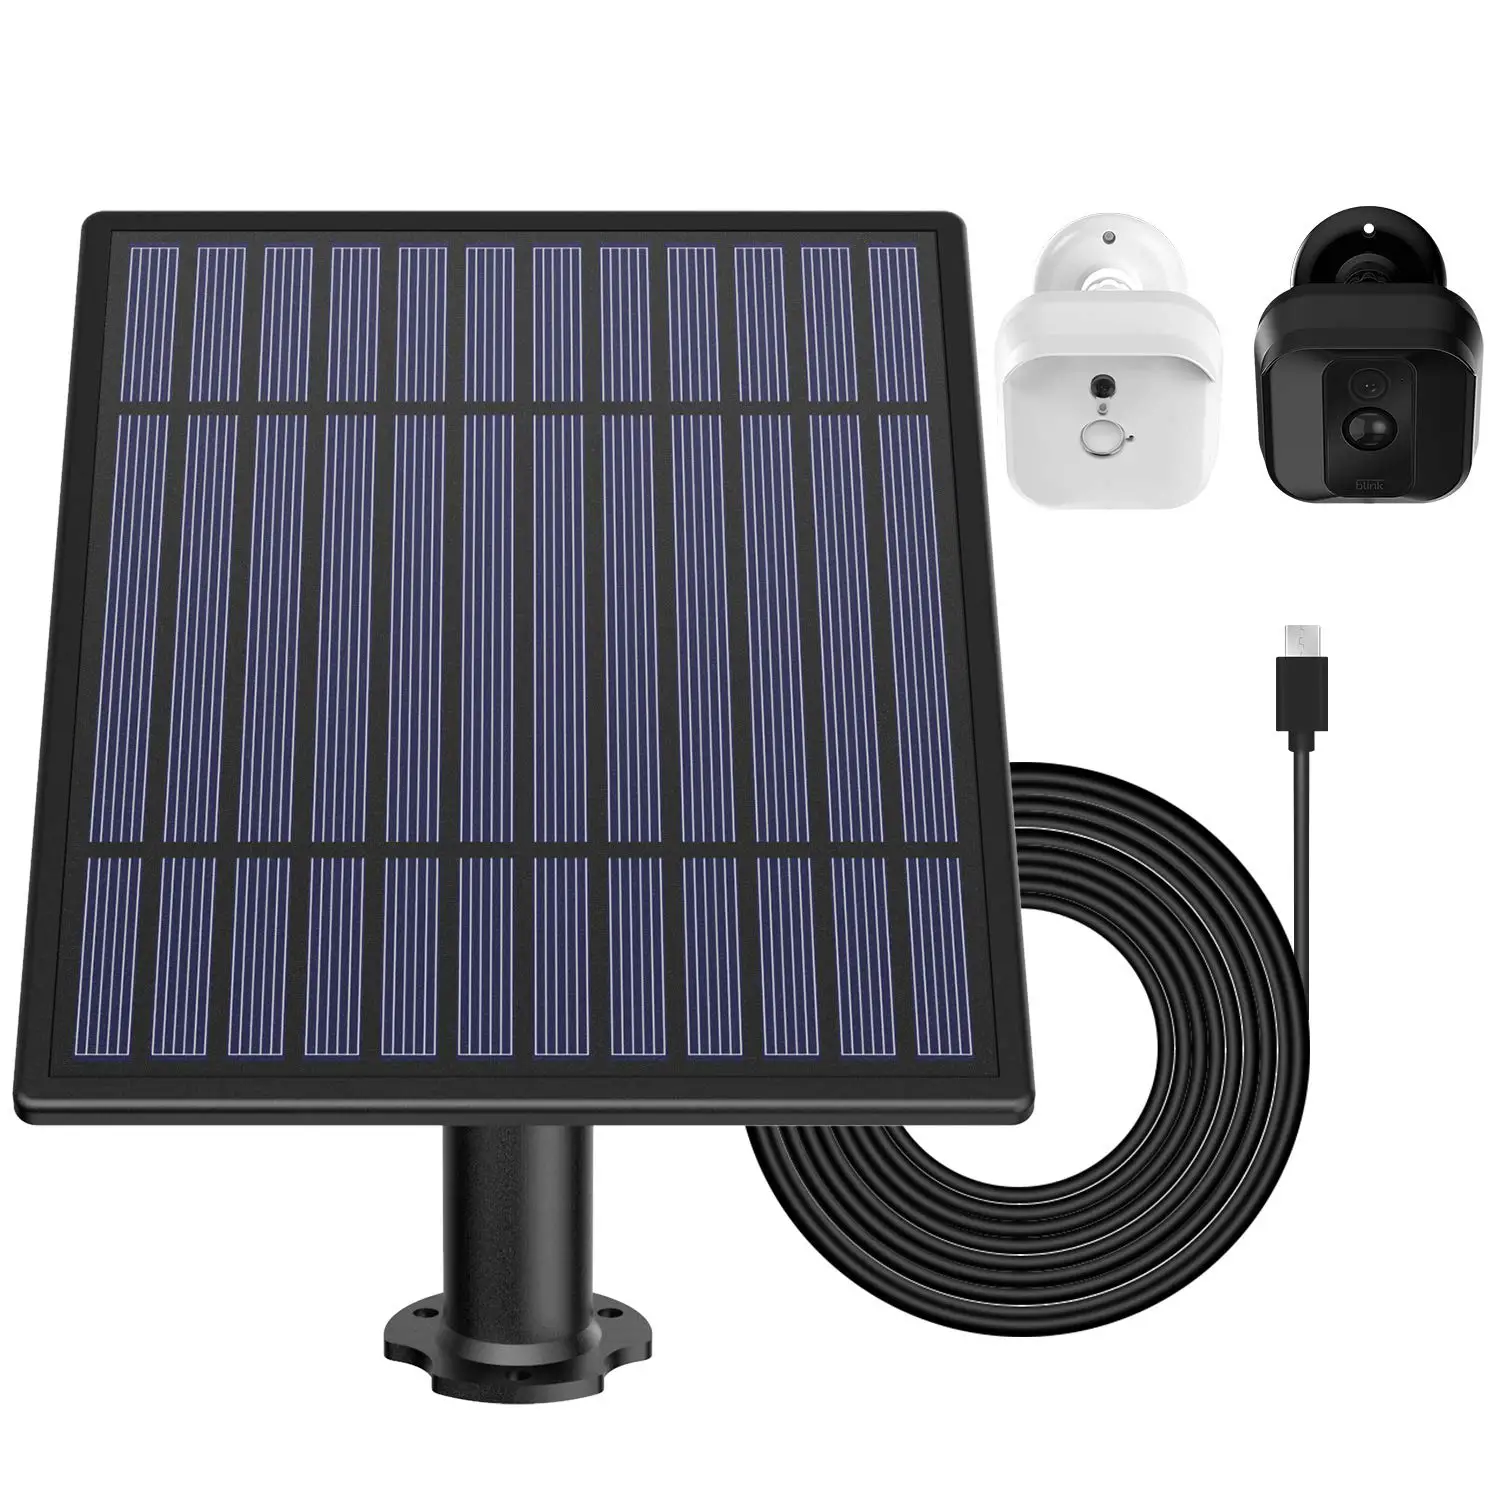 Solar Panel for Blink XT Security Camera, Wall Mount Outdoor ...